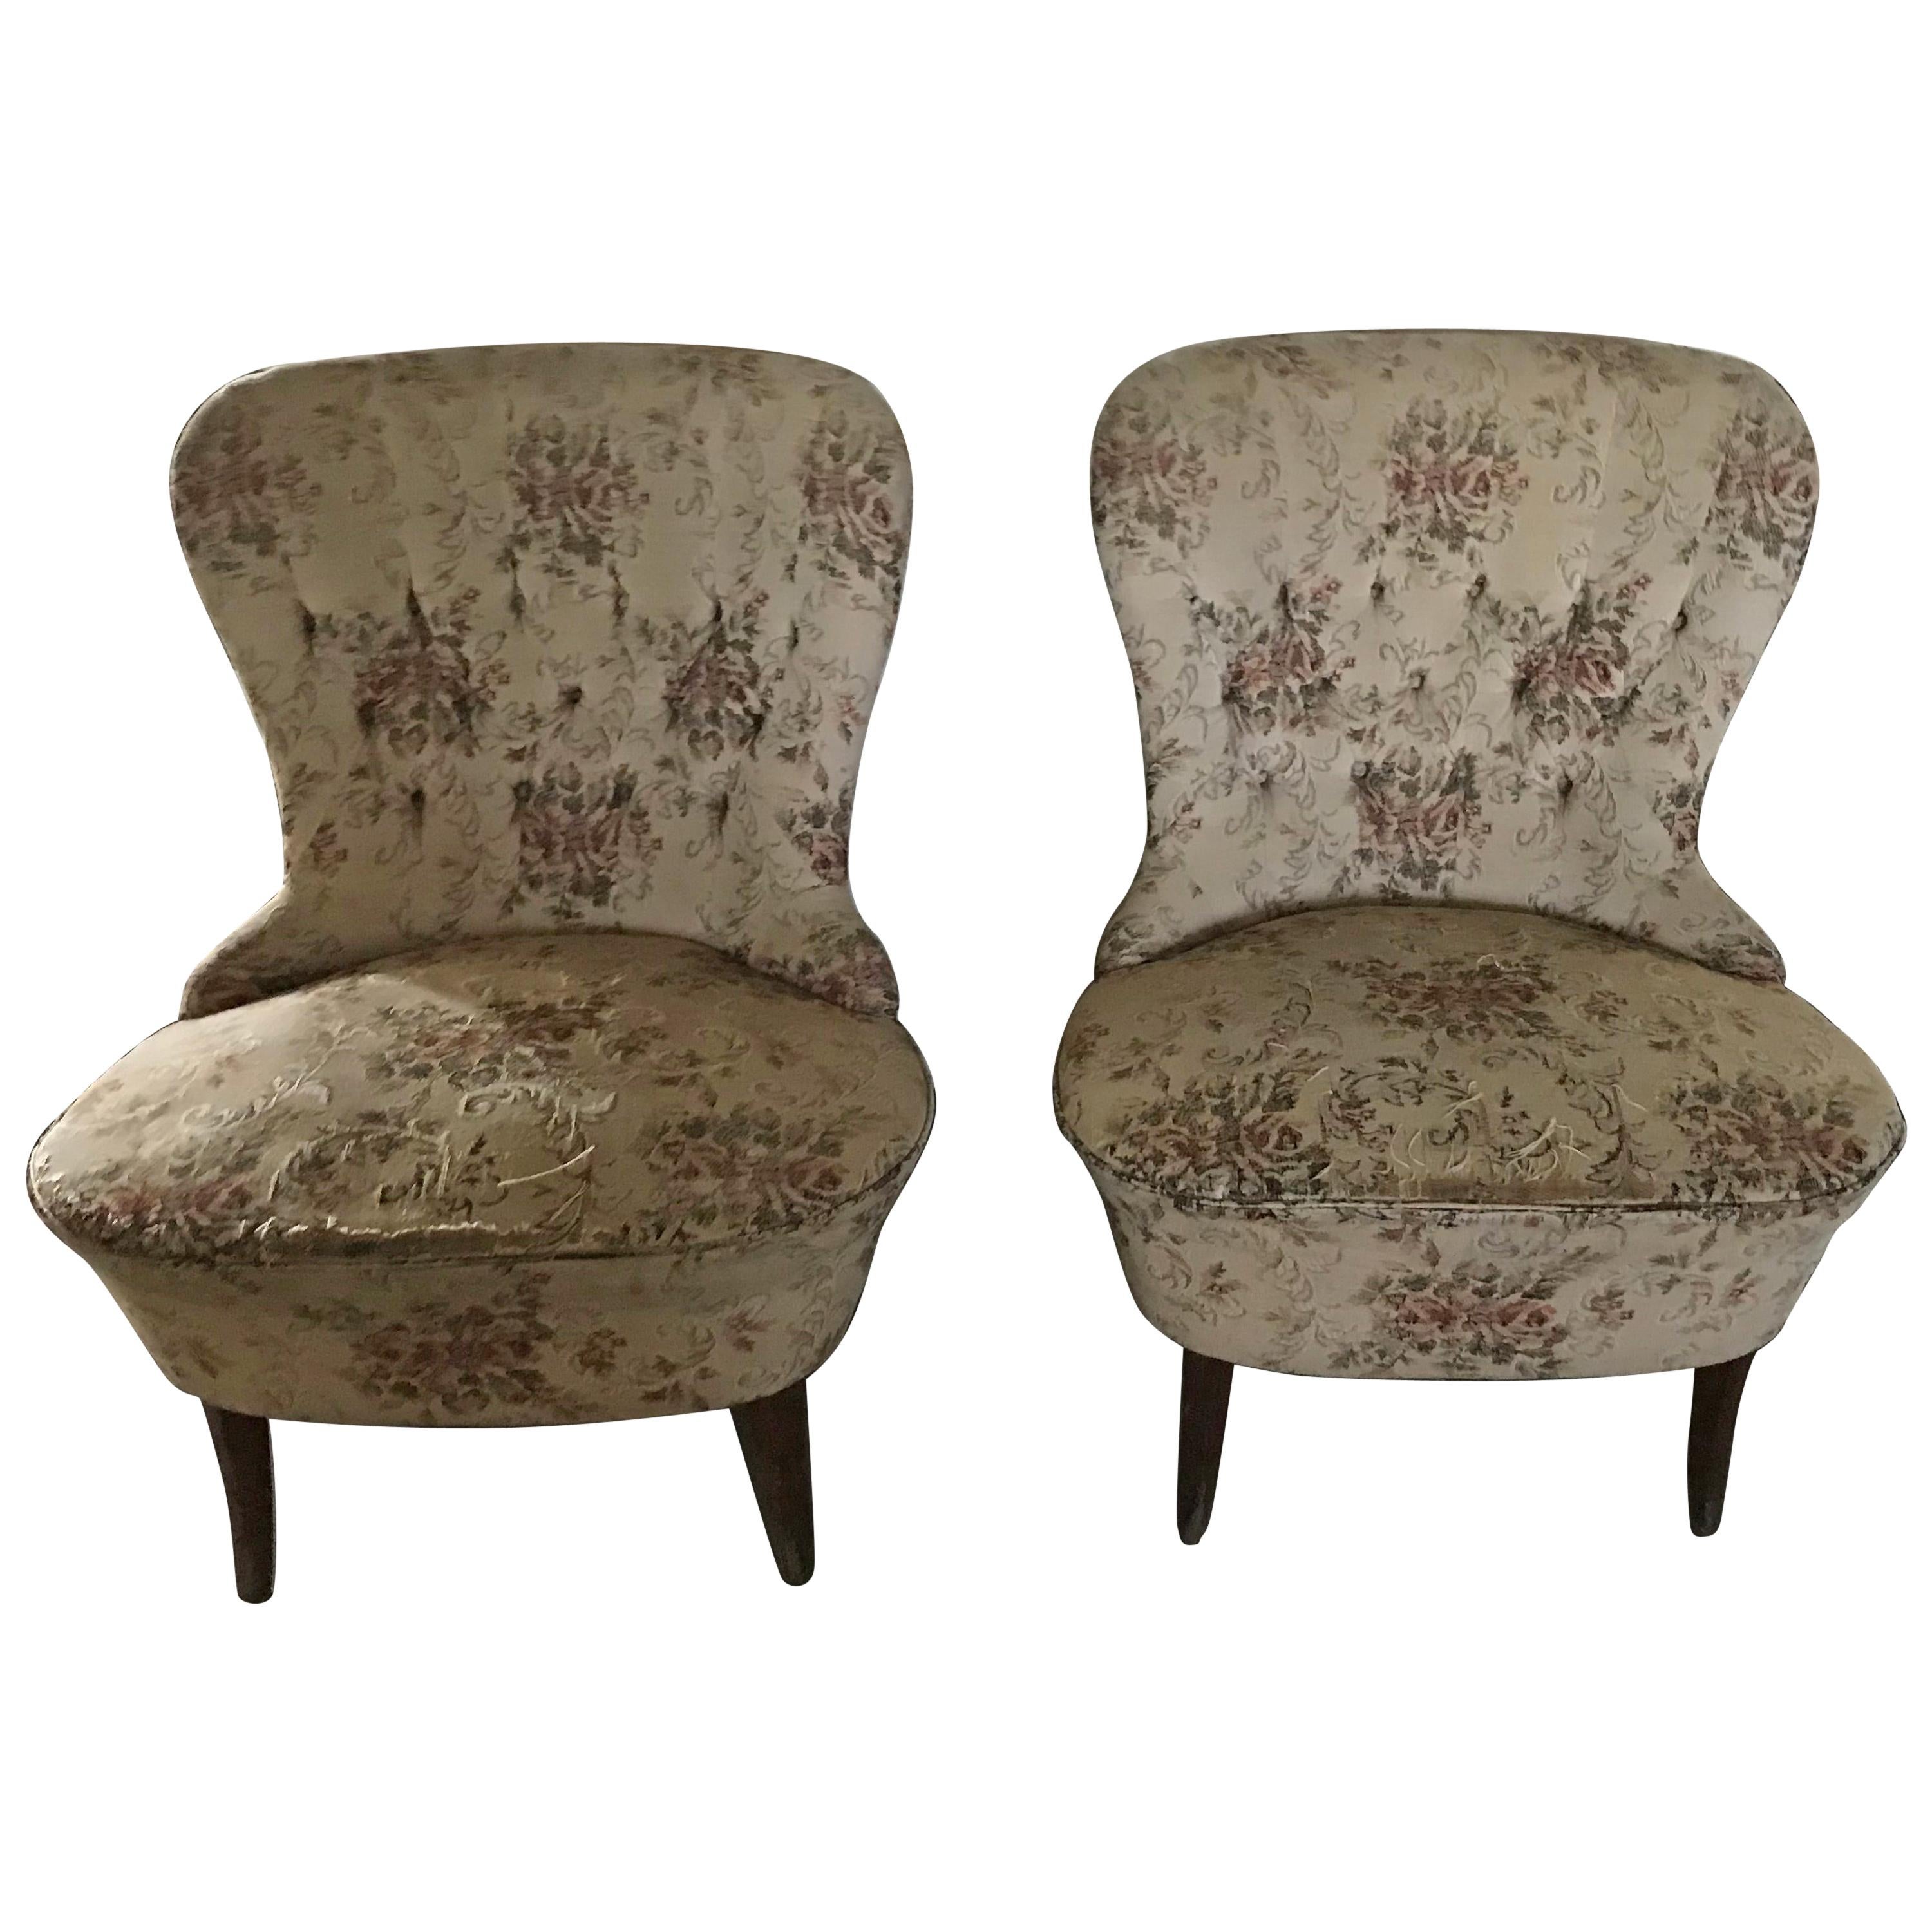 Pair of Vintage Chairs in Original Floral Fabric For Sale